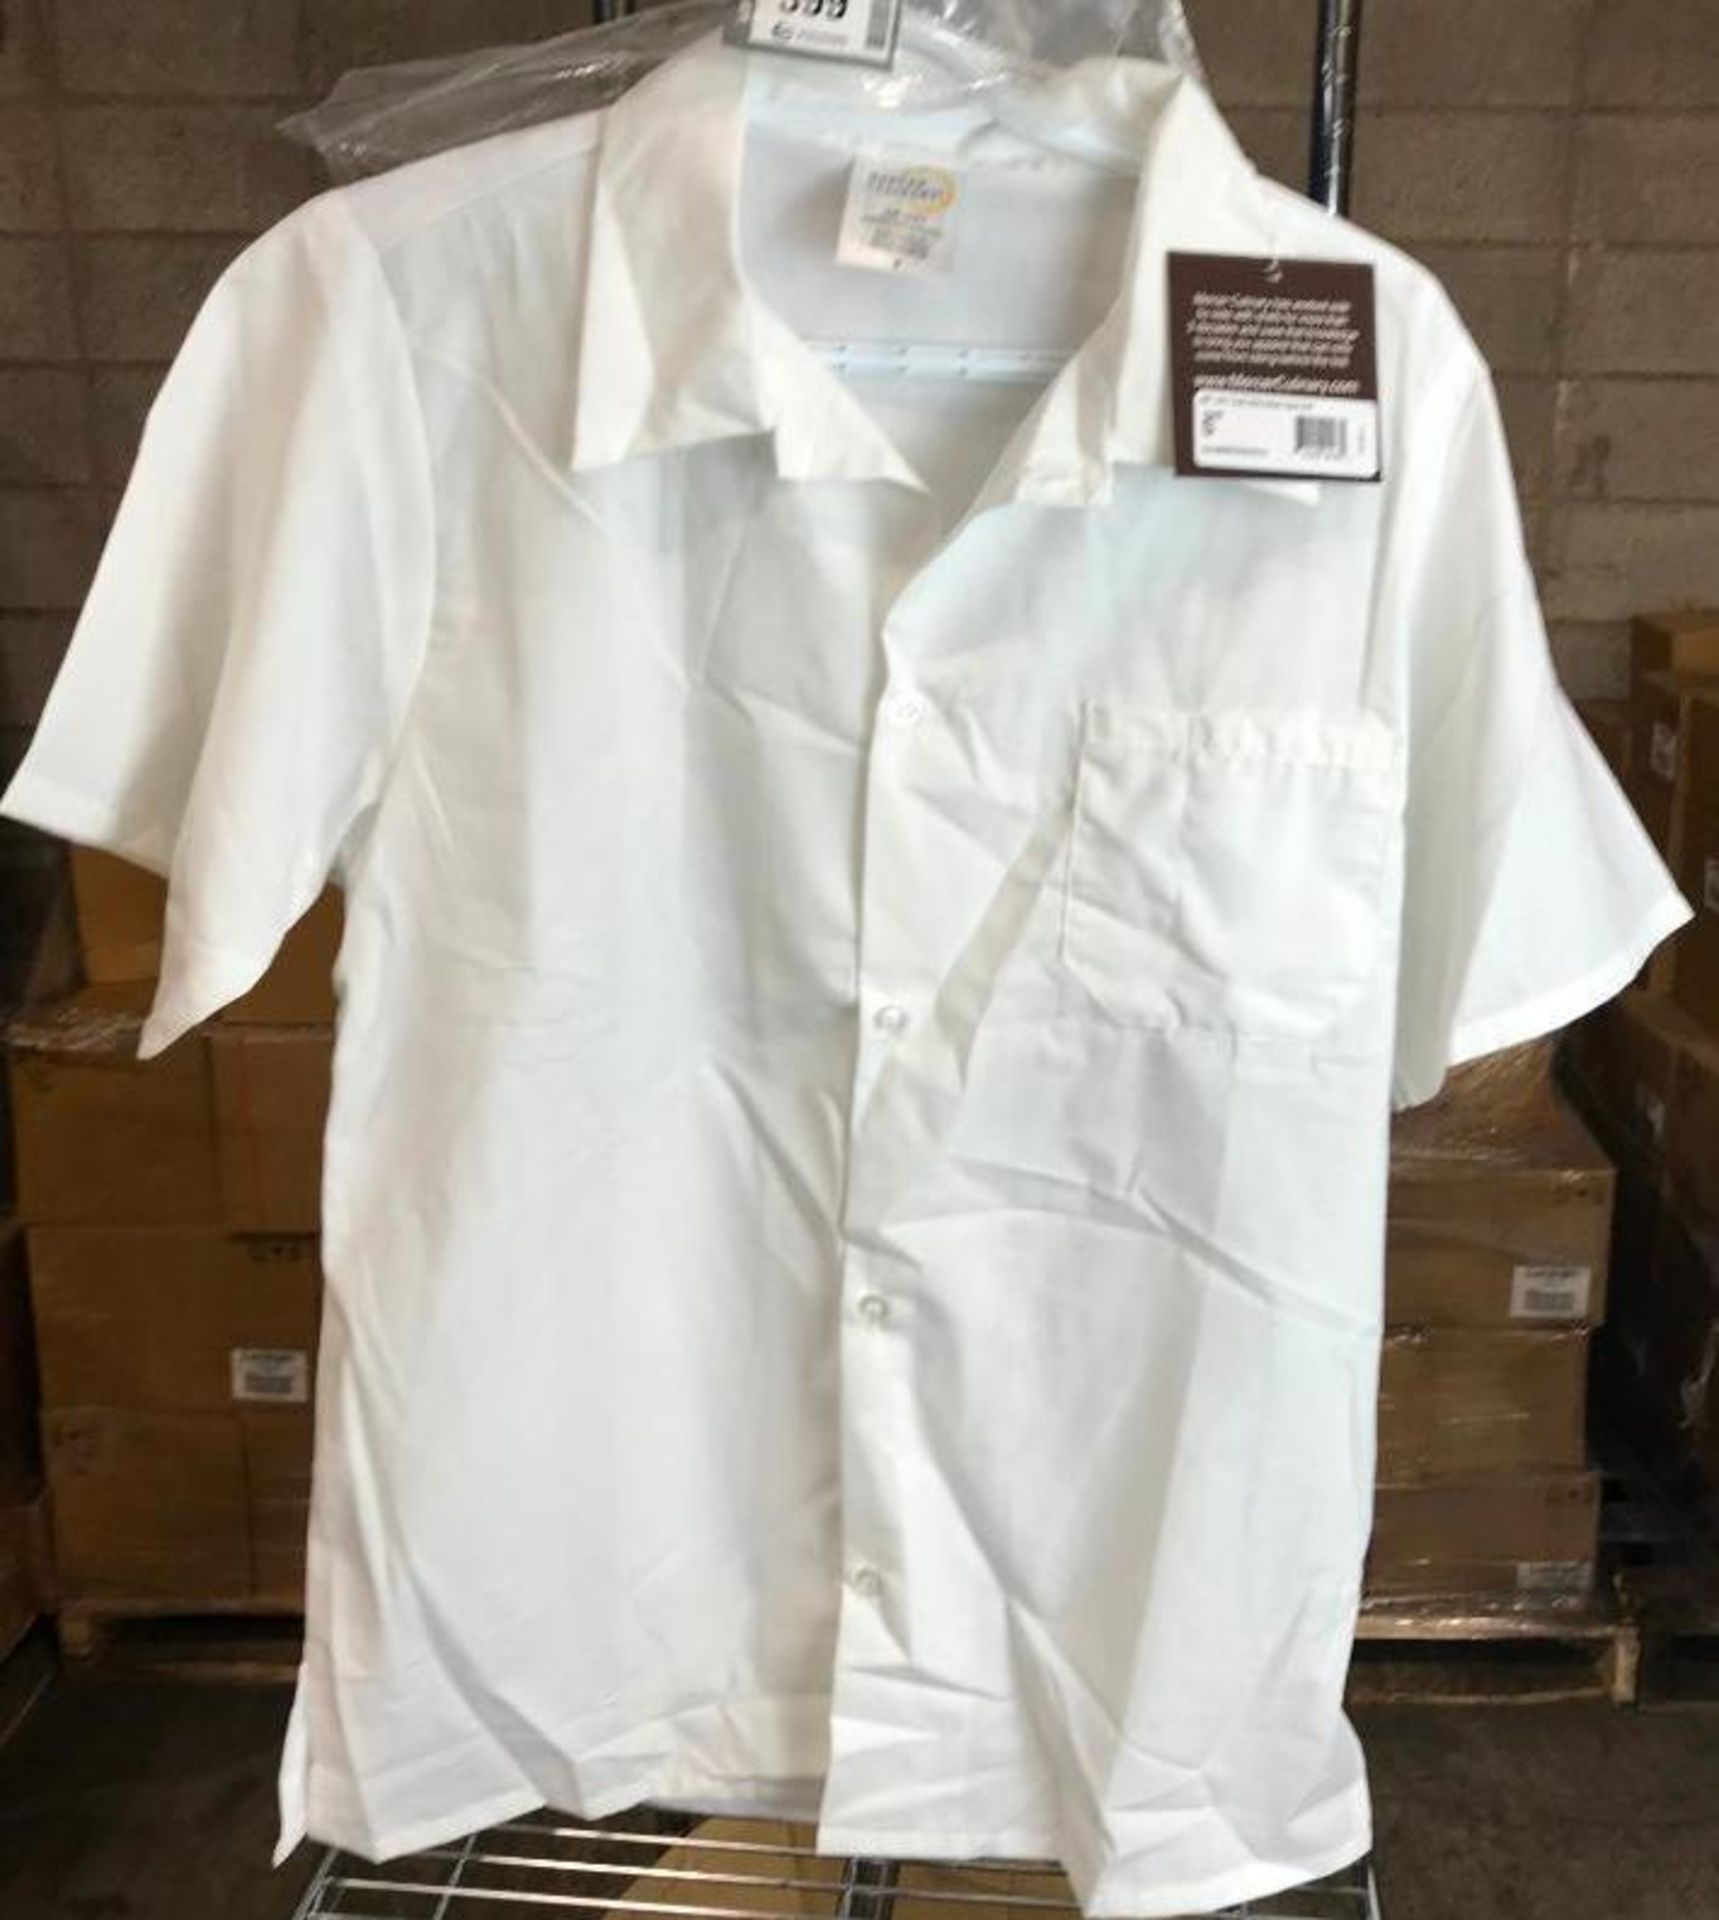 MERCER CULINARY MIL UNI COOK SHIRT-MESH BACK WHITE SIZE SMALL - M60200WHS - Image 3 of 3